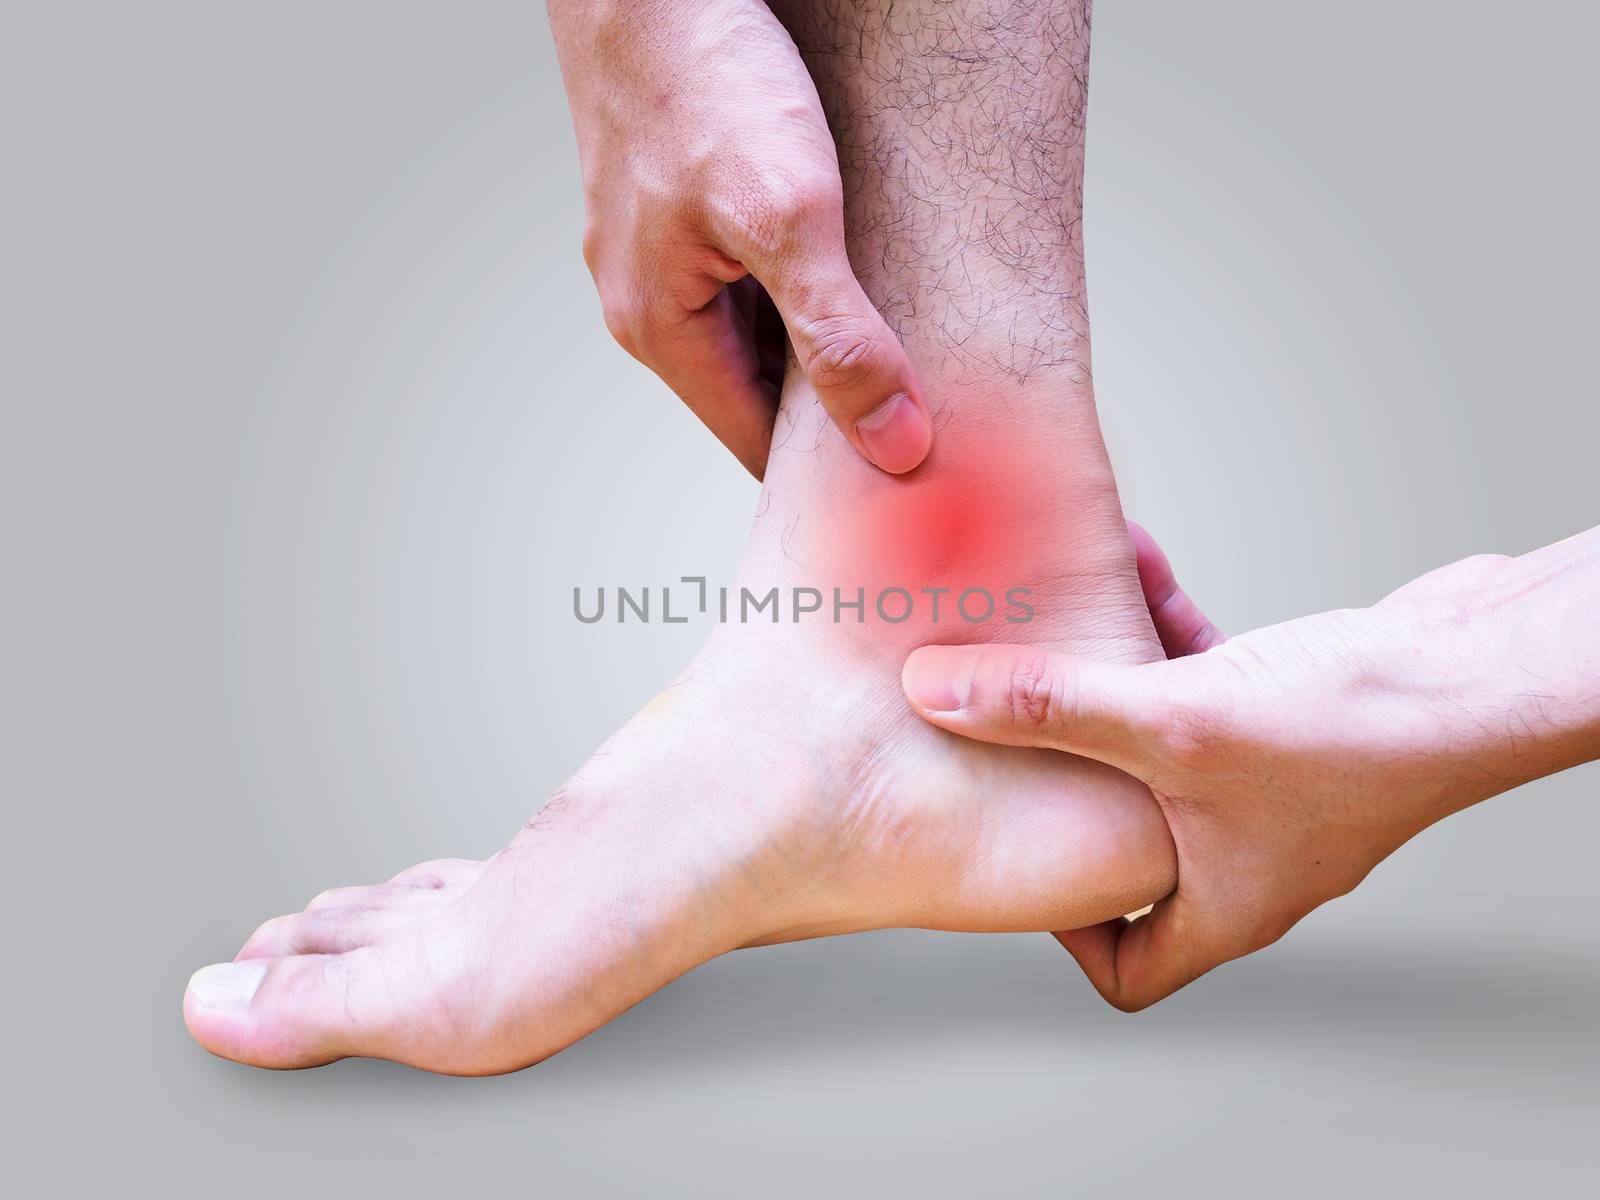 Young man suffering foot and ankle pain or sprained ankle.